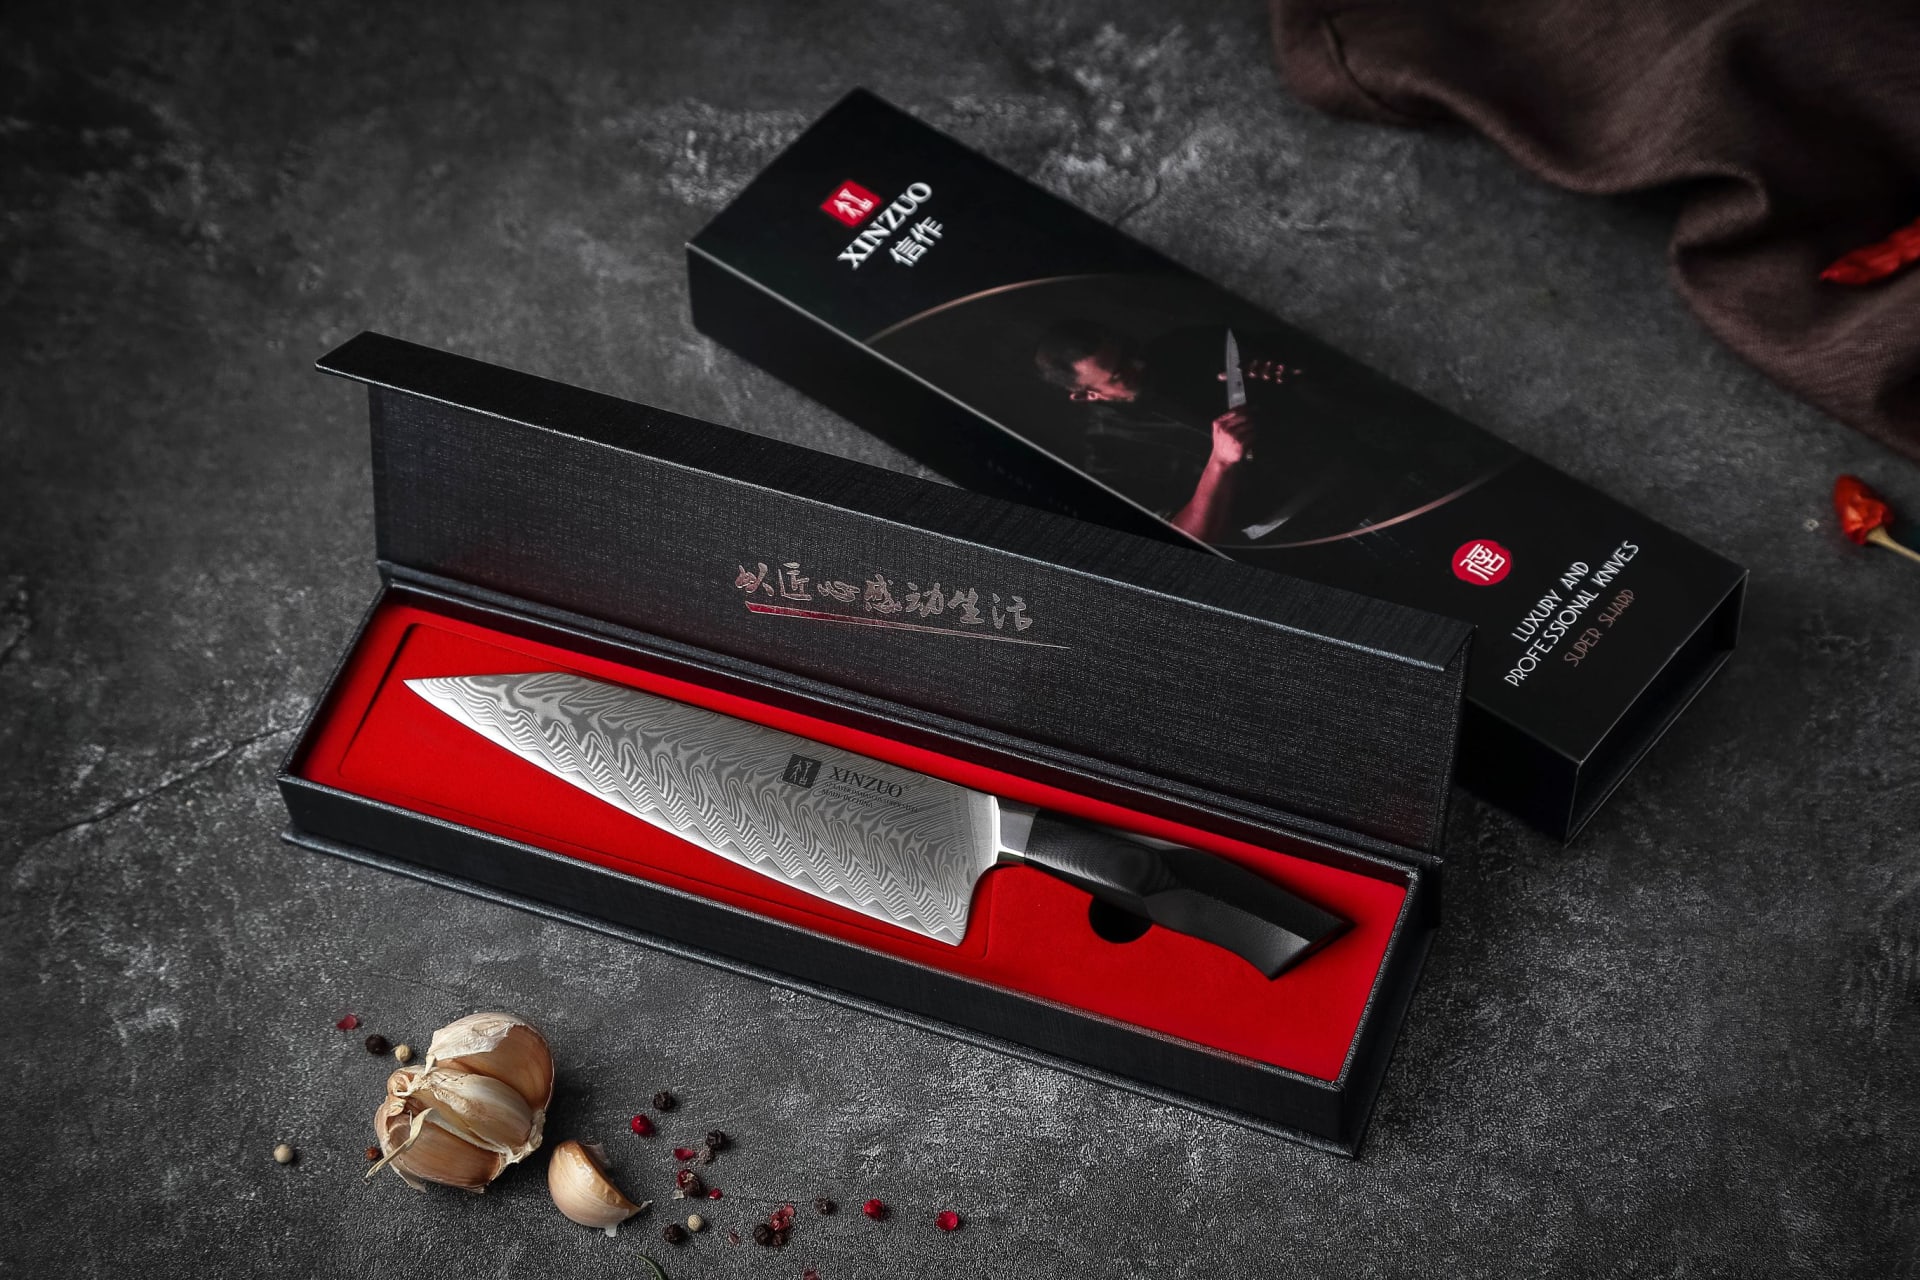 All XinZuo kitchen knives come gift wrapped = perfect as a gift